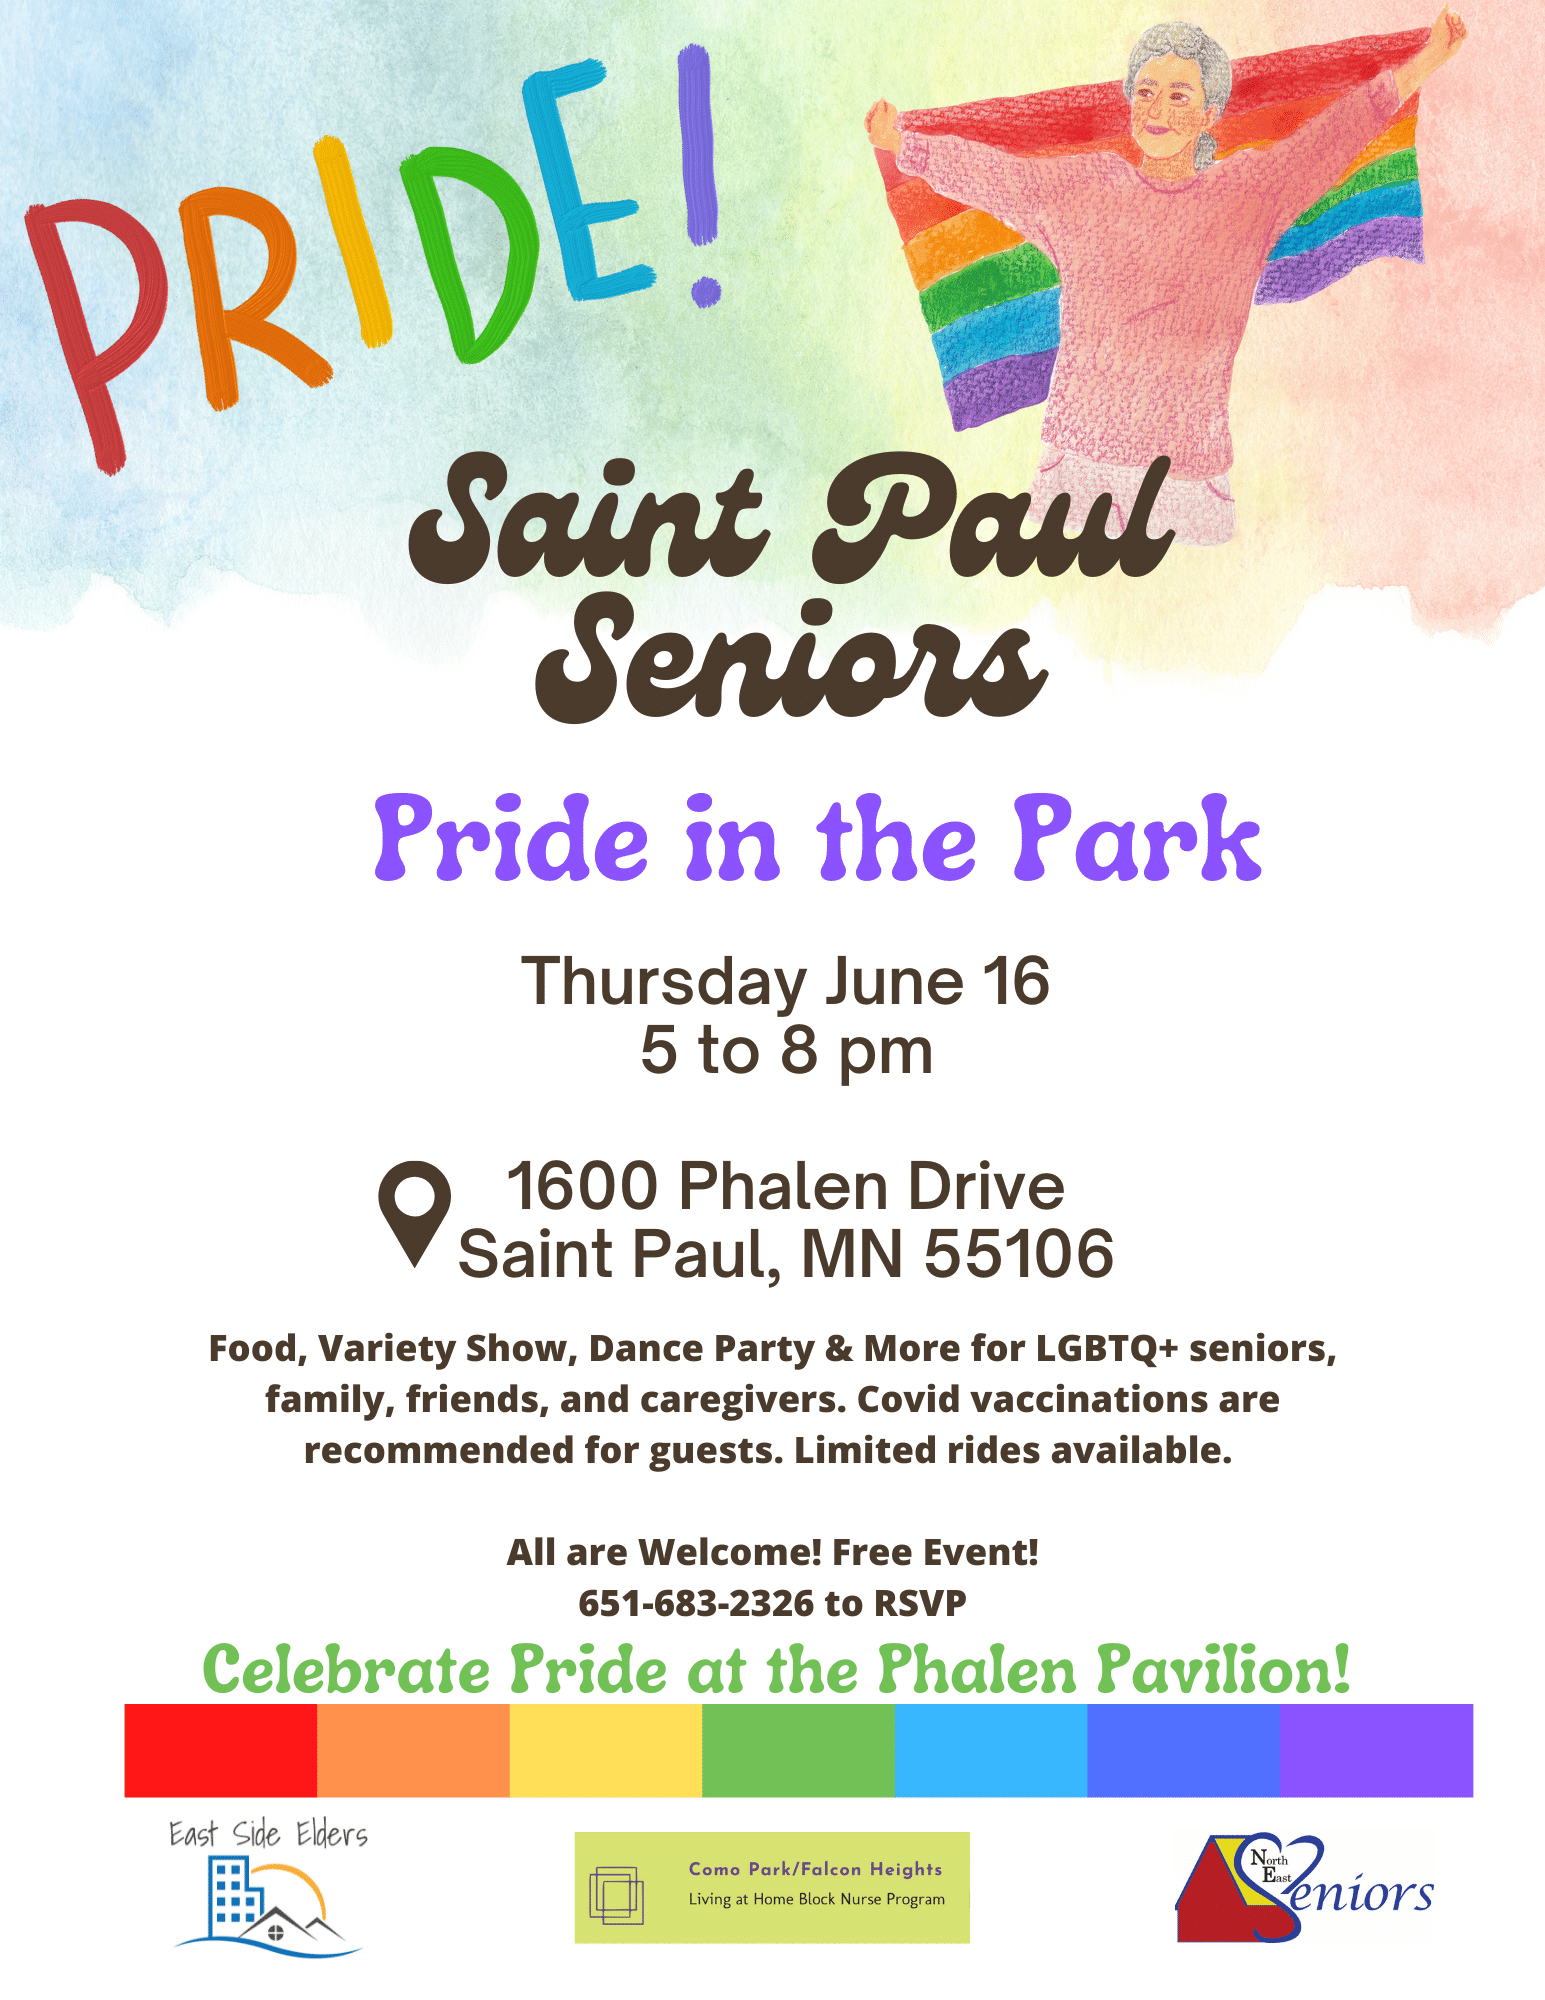 Flyer for Saint Paul Seniors Pride in the Park. Top of the flyer features a watercolor style rainbow flag in the background. Includes an illustrative image of an older adult holding a rainbow flag. Text: Pride! Saint Paul Seniors Pride in the Park. Thursday June 16 5 to 8 pm. Icon for a location marker next to the following text: 1600 Phalen Drive Saint Paul, MN 55106. Text: Food, Variety Show, Dance Party & More for LGBTQ+ seniors, family, friends, and caregivers. Covid vaccinations are recommended for guests. Limited rides available. All are Welcome! Free Event! 651-683-2326 to RSVP. Celebrate Pride at the Phalen Pavillion. Bottom border of a rainbow. Includes logos for East Side Elders, Como Park/Falcon Heights Living at Home Block Nurse Program, and NE Seniors.